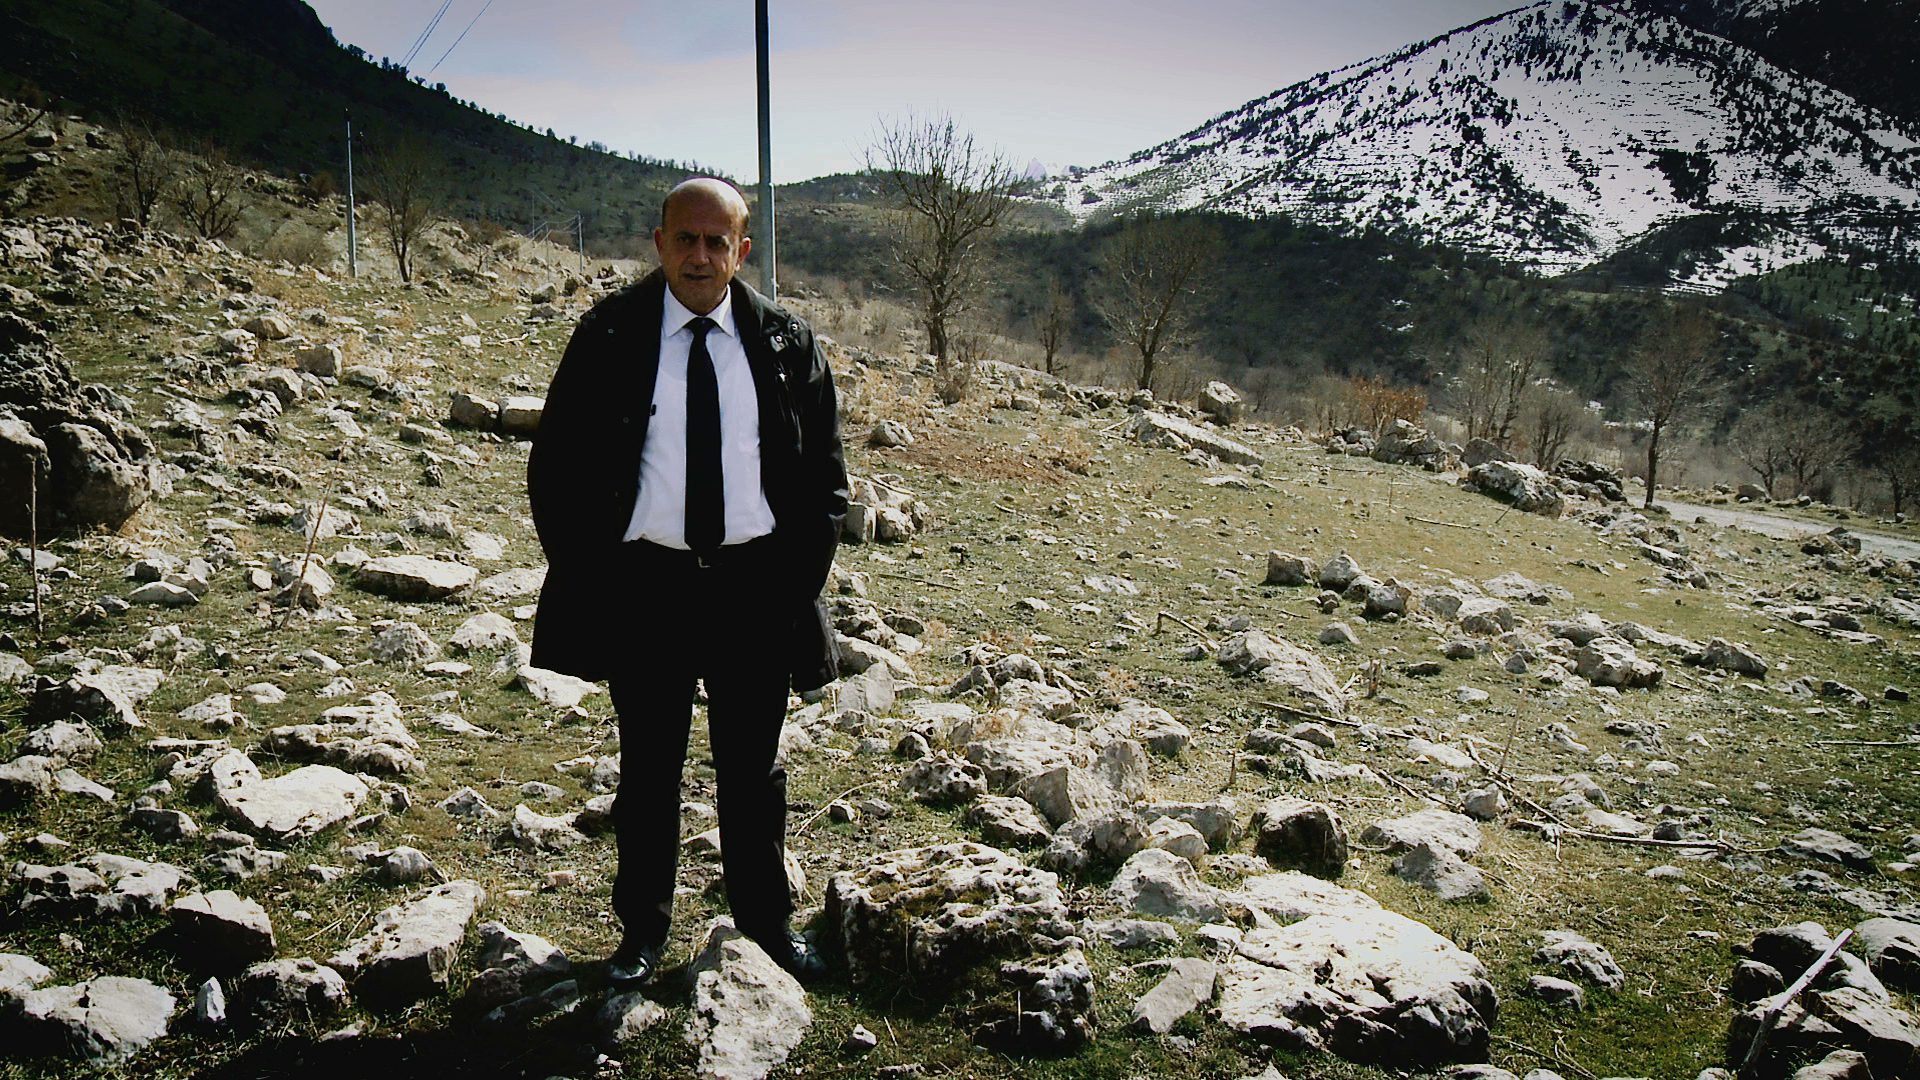 SHORESH HAJI MUSTAFA RASOOL relates the nightmare of fleeing towards Iran in March 1988 in deep snow, after the Iraqi regimeâ€™s gas attack on the PUK headquarters in the Jafati valley. In the mountains, he saw hundreds of frozen animal carcasses, elderly people abandoned by their relatives and a woman giving birth in the snow. This gave him hope for Kurdistanâ€™s future. 